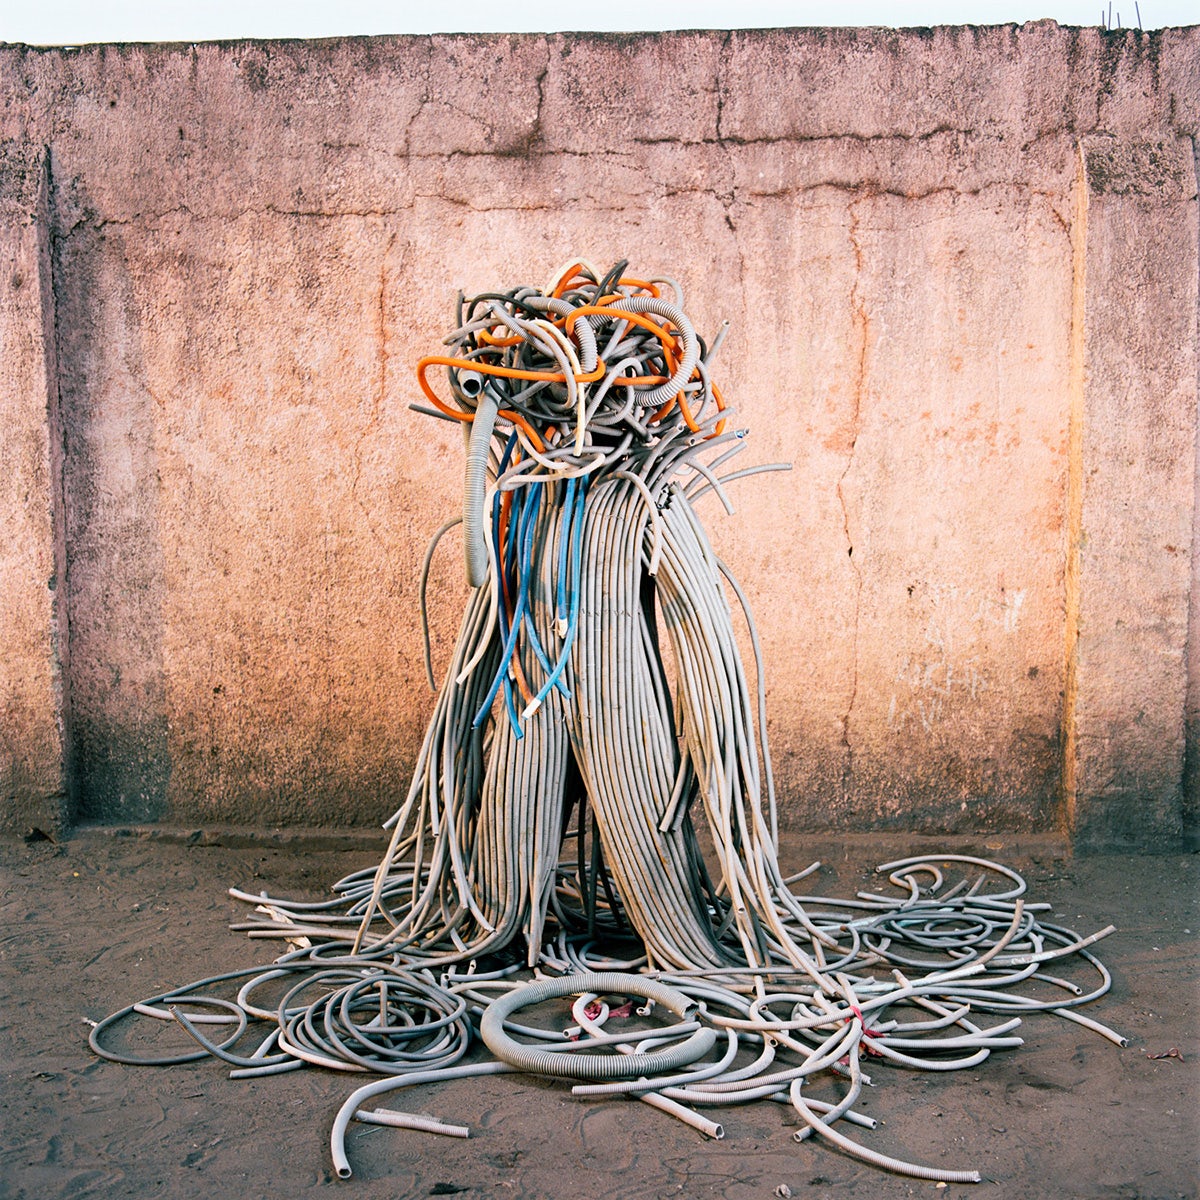 Photo by Colin Delfosse showing a person wearing a costume made out of old tubes, with the appearance of having tentacles, stood in front of a peach coloured wall